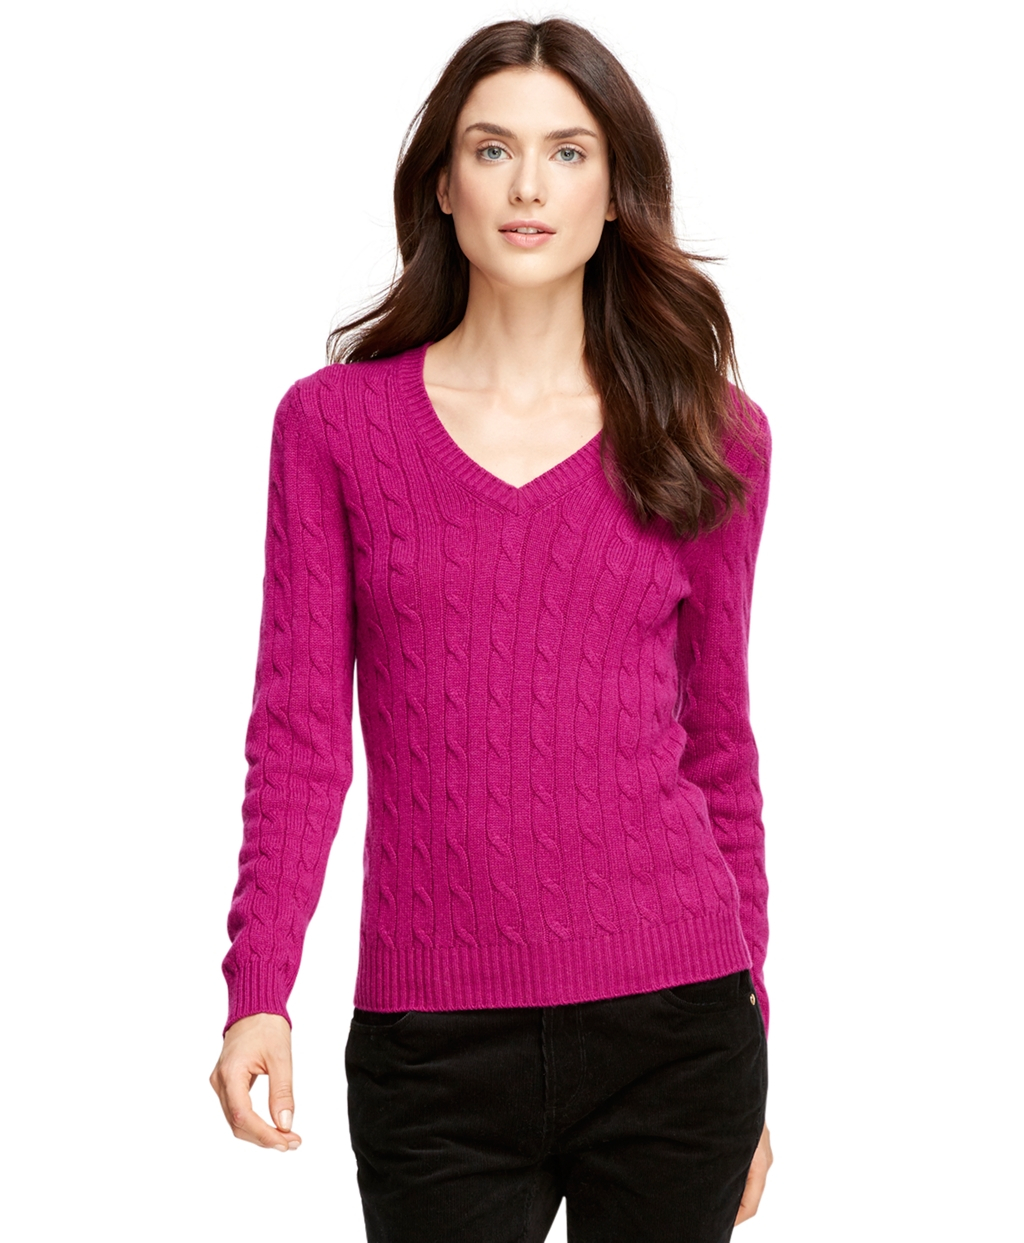 Lyst - Brooks Brothers Cashmere Cable Knit V-Neck Sweater in Purple